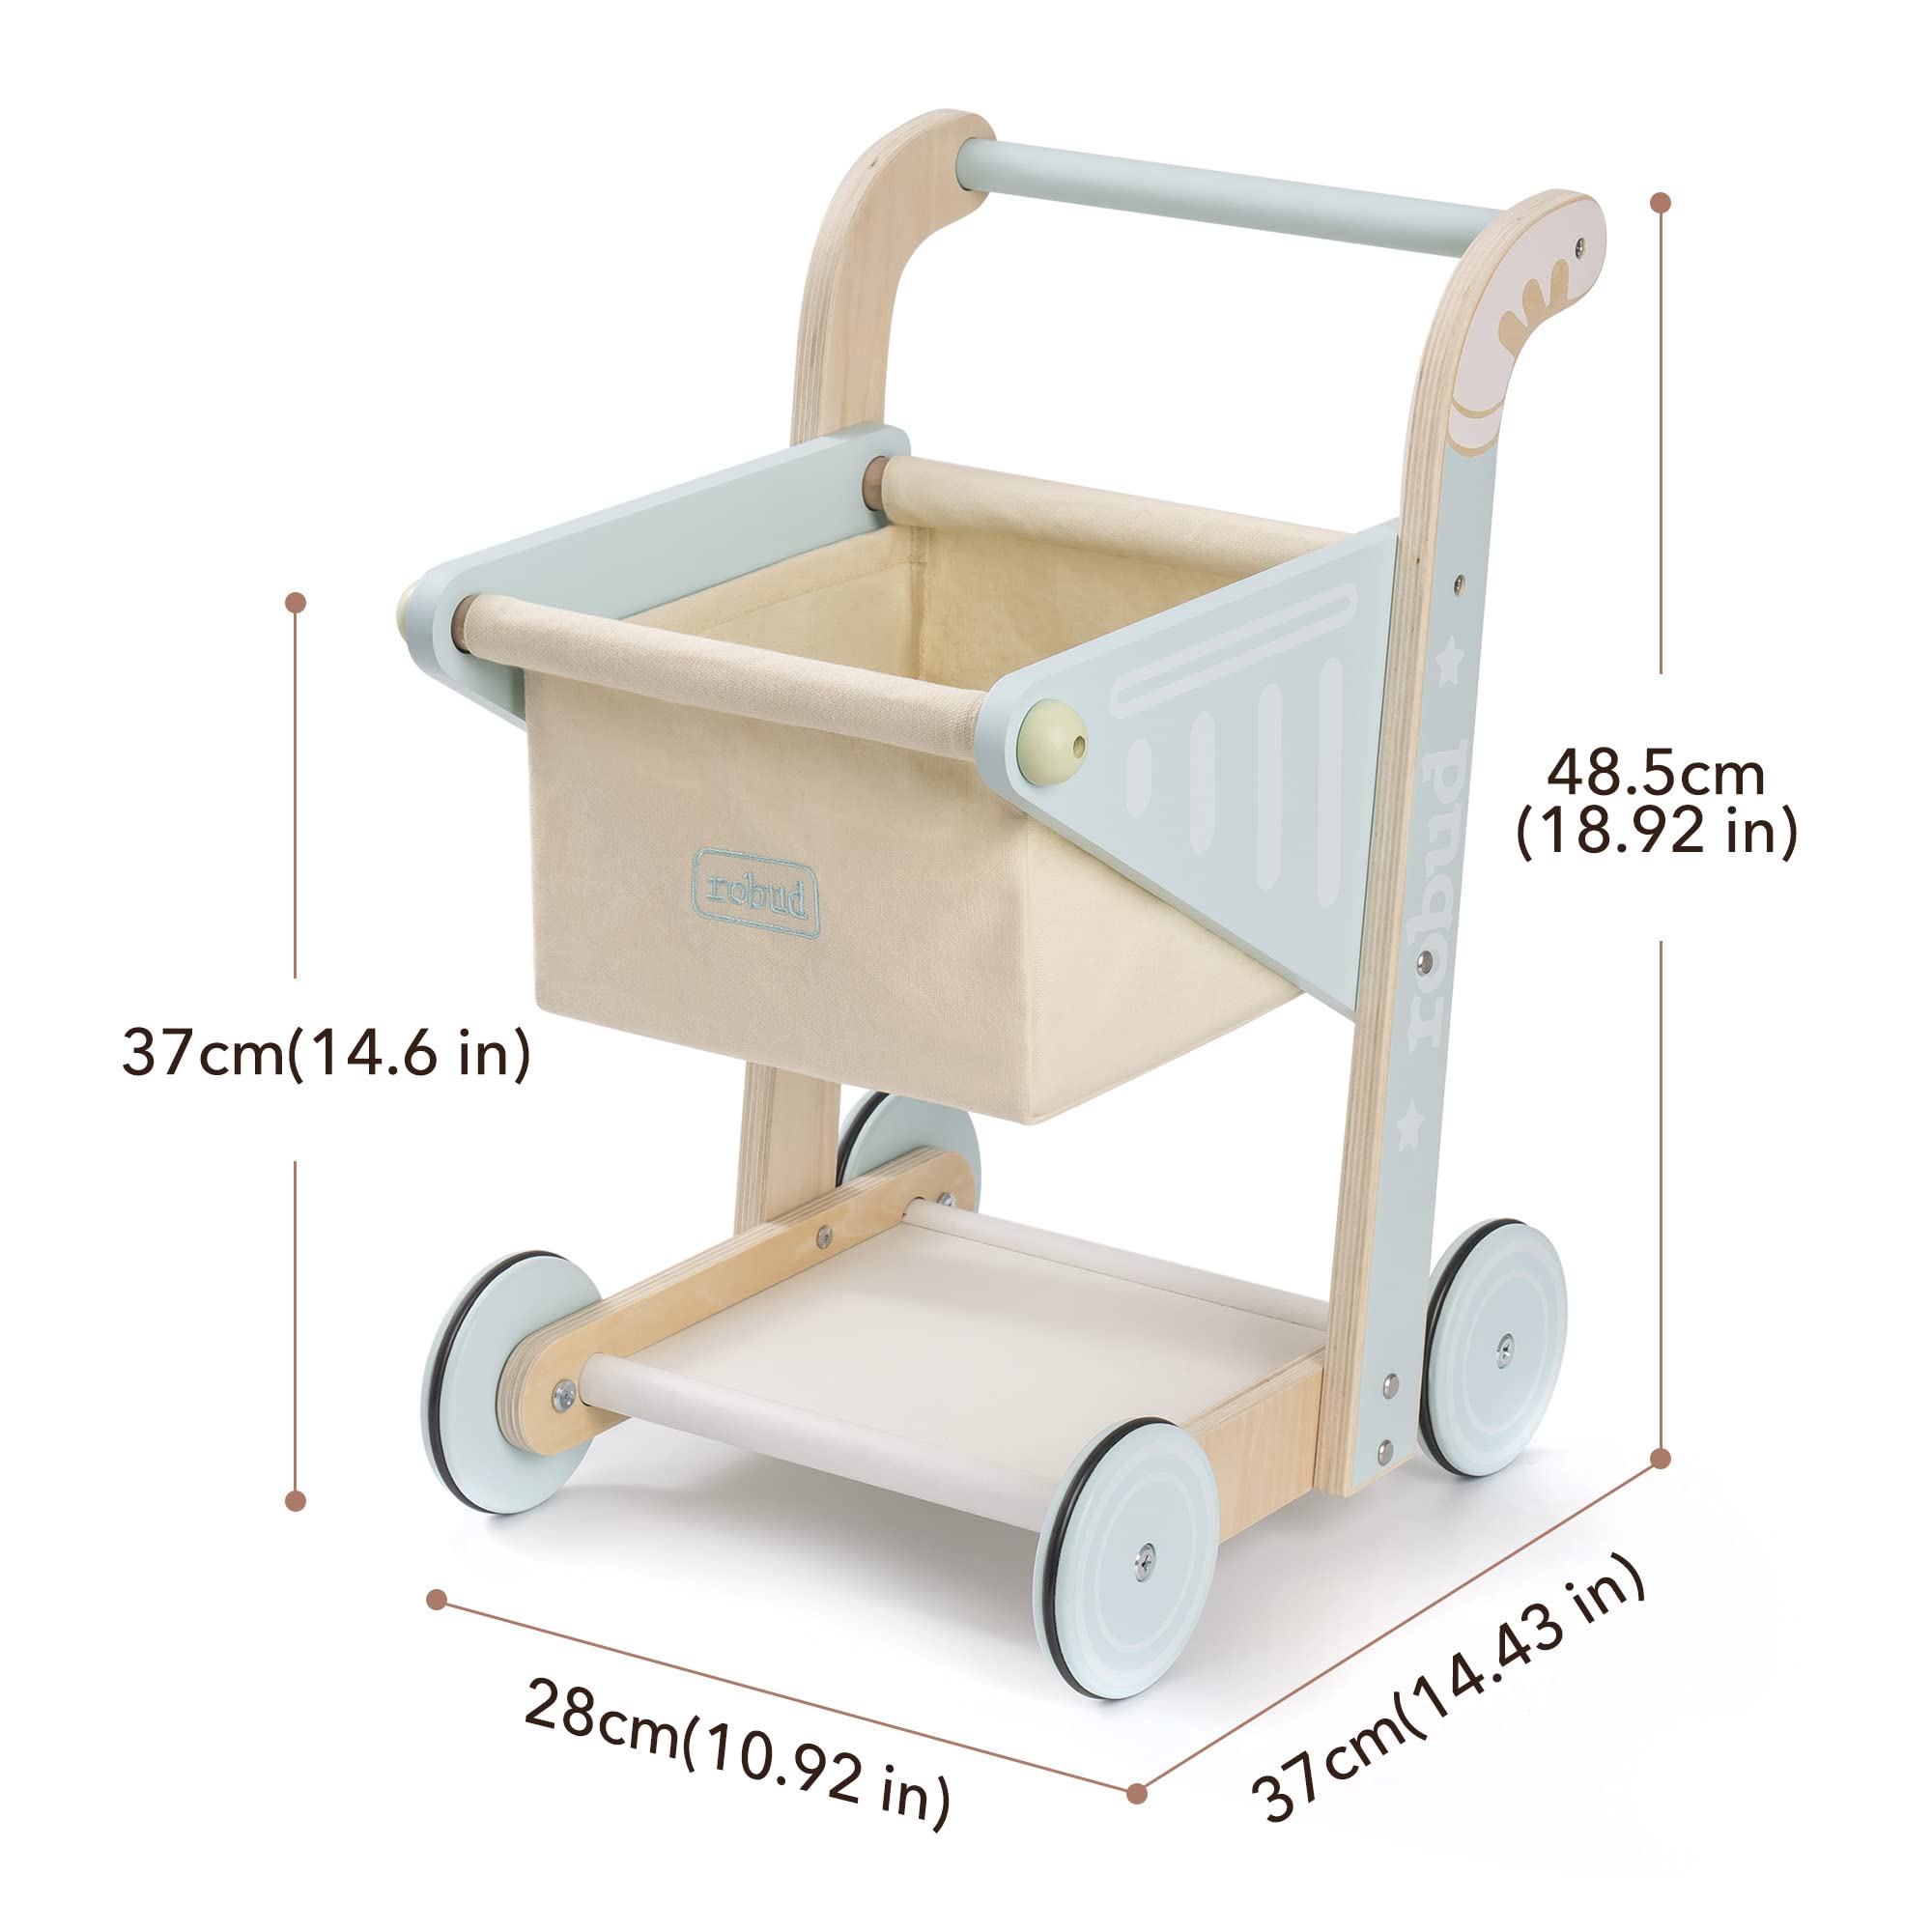 ROBUD Wooden Baby Walker for Girls Boys, Wooden Shopping Cart for Kids Toddlers, Learning Walker Toys for 10 Months 1 Year Old